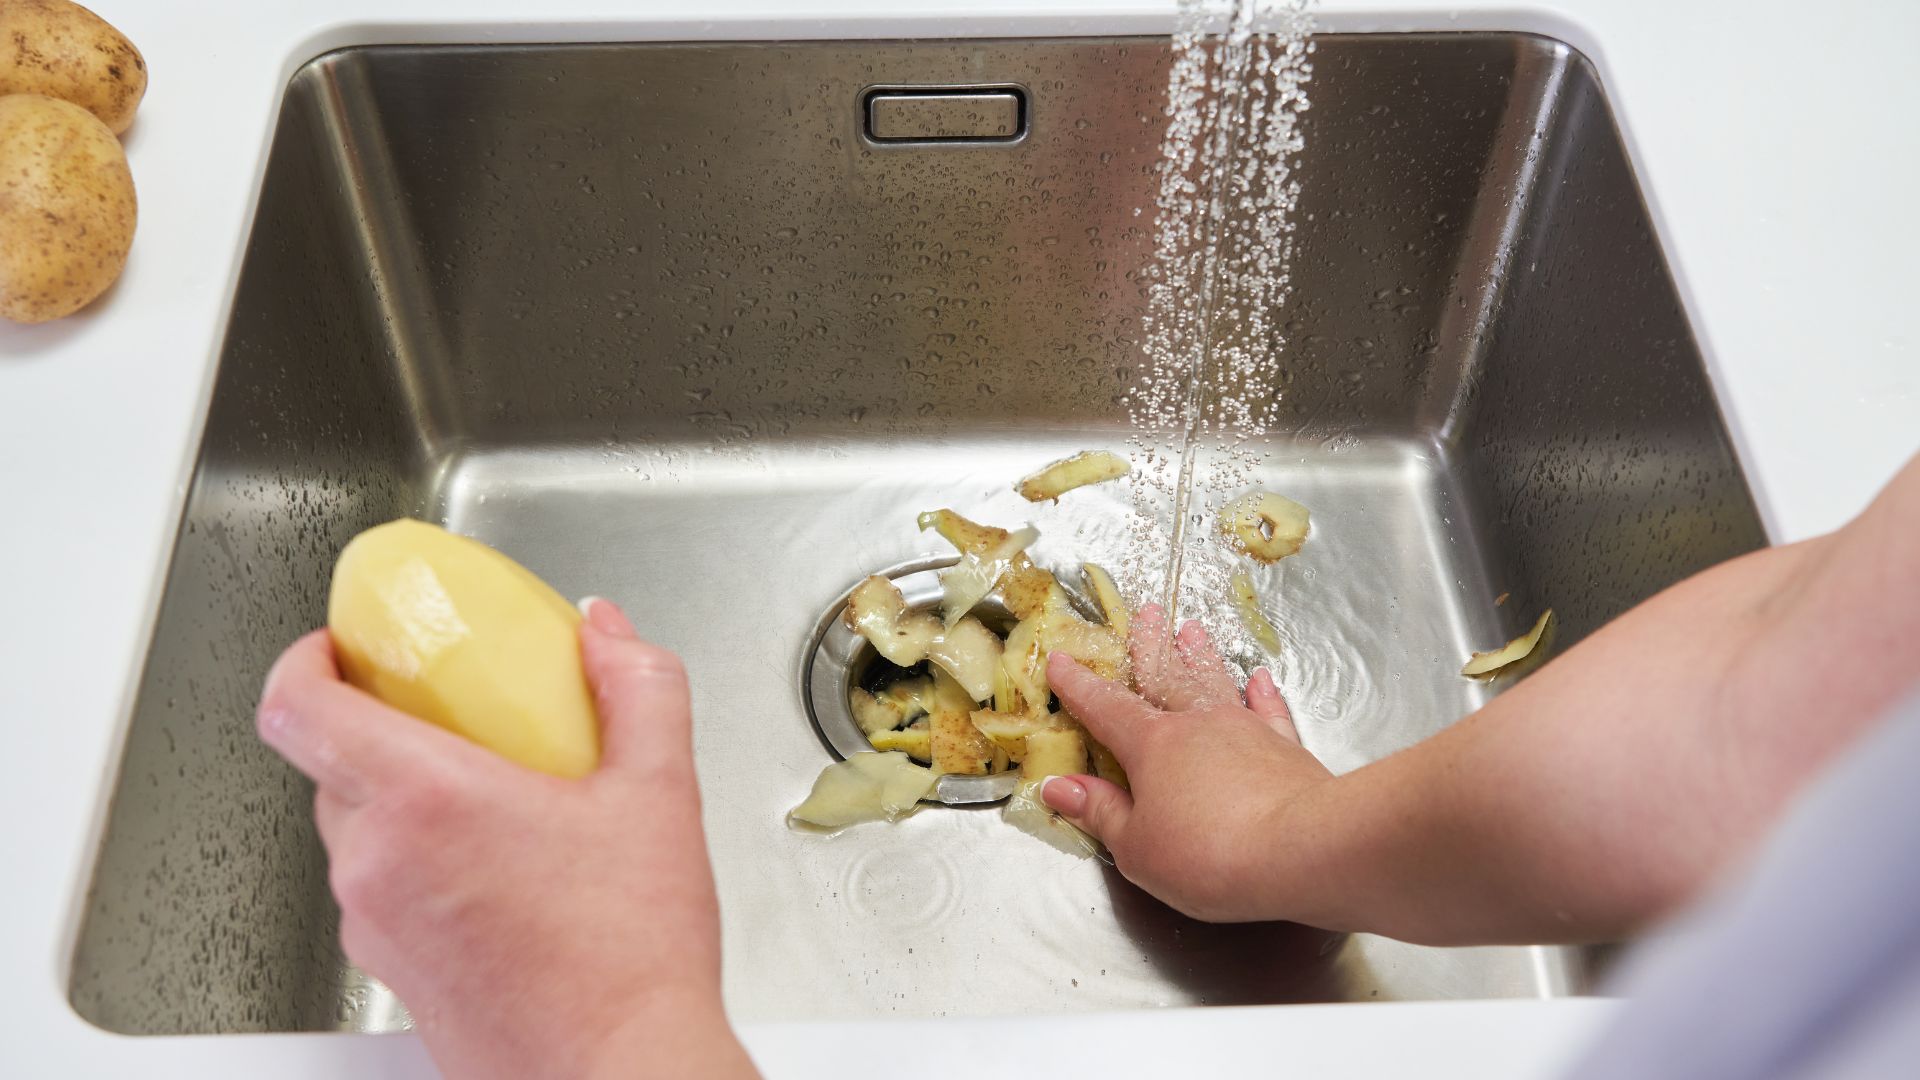 Person peeling potatoes over a kitchen sink and putting the peels in the garbage disposal